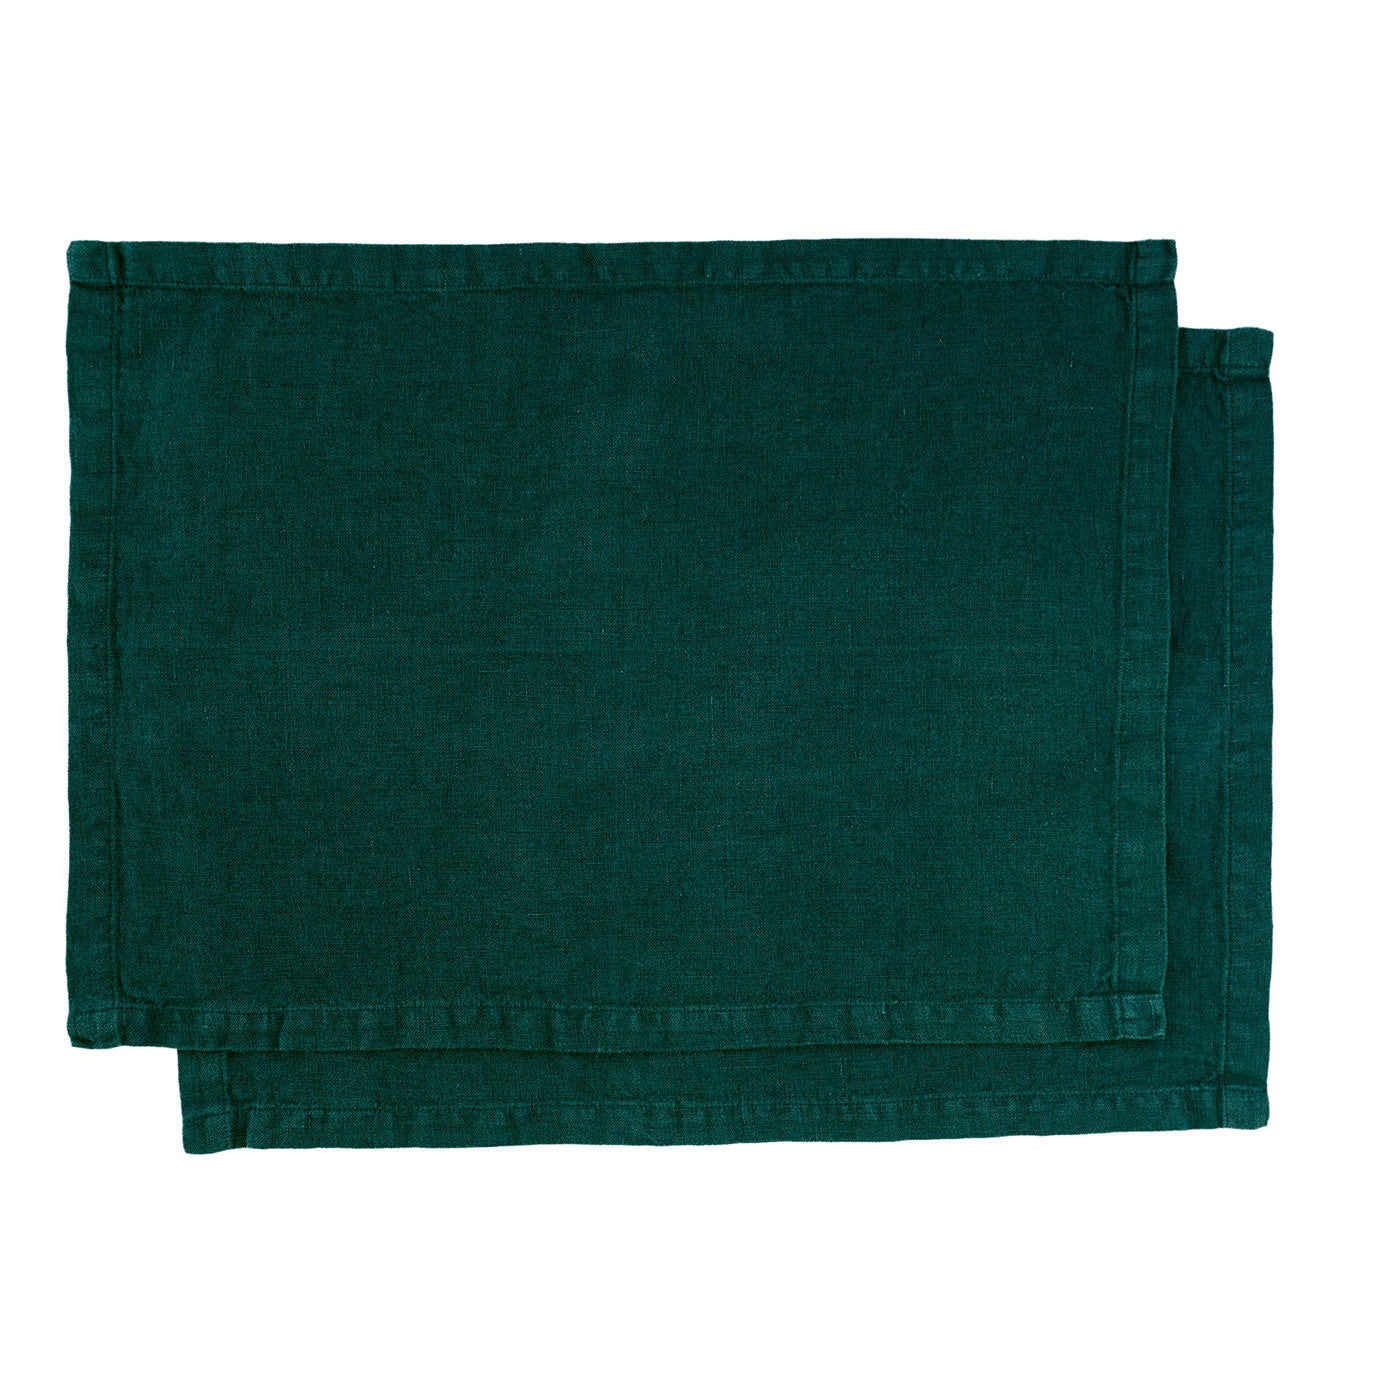 Set of 4 Forest-Green Linen Placemats - Main view